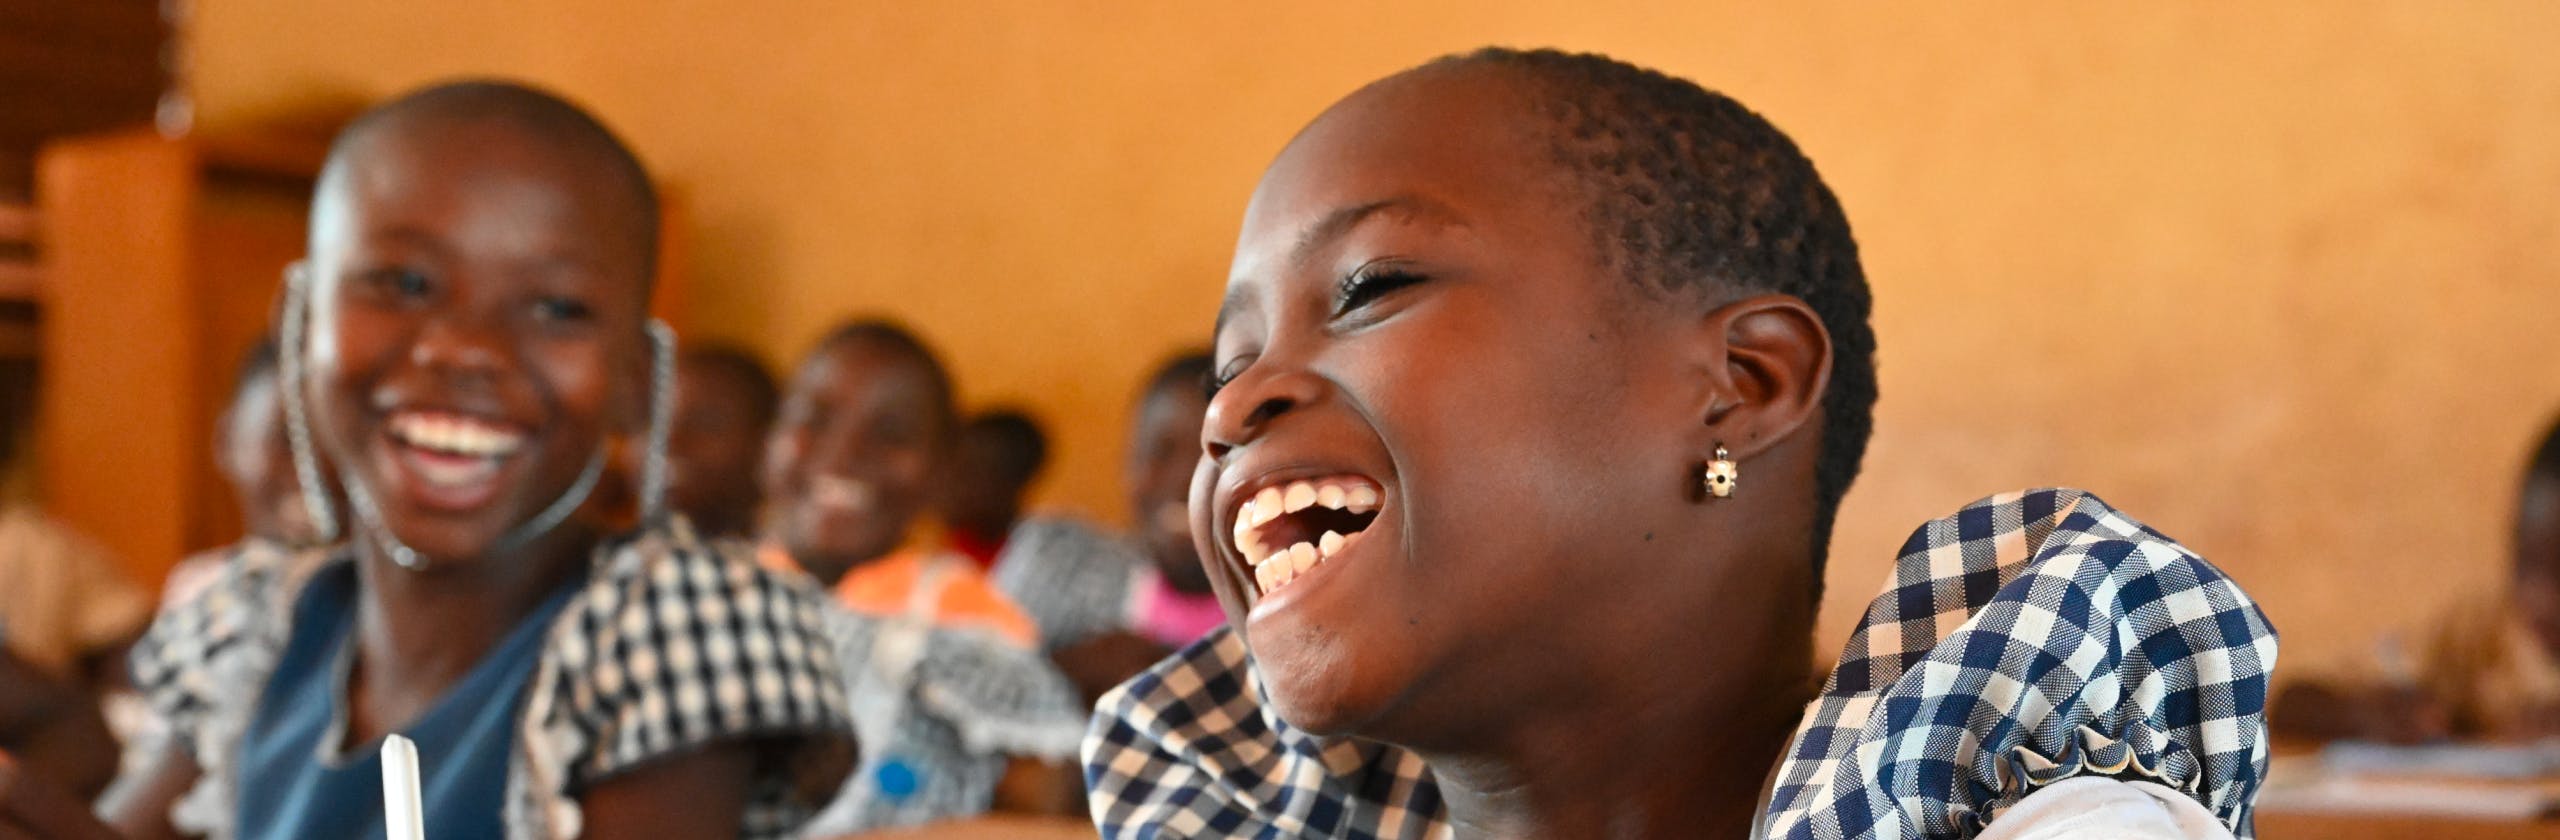 Education- A happy girl attending class in the village of Nambonkaha, in the North of Côte d’Ivoire